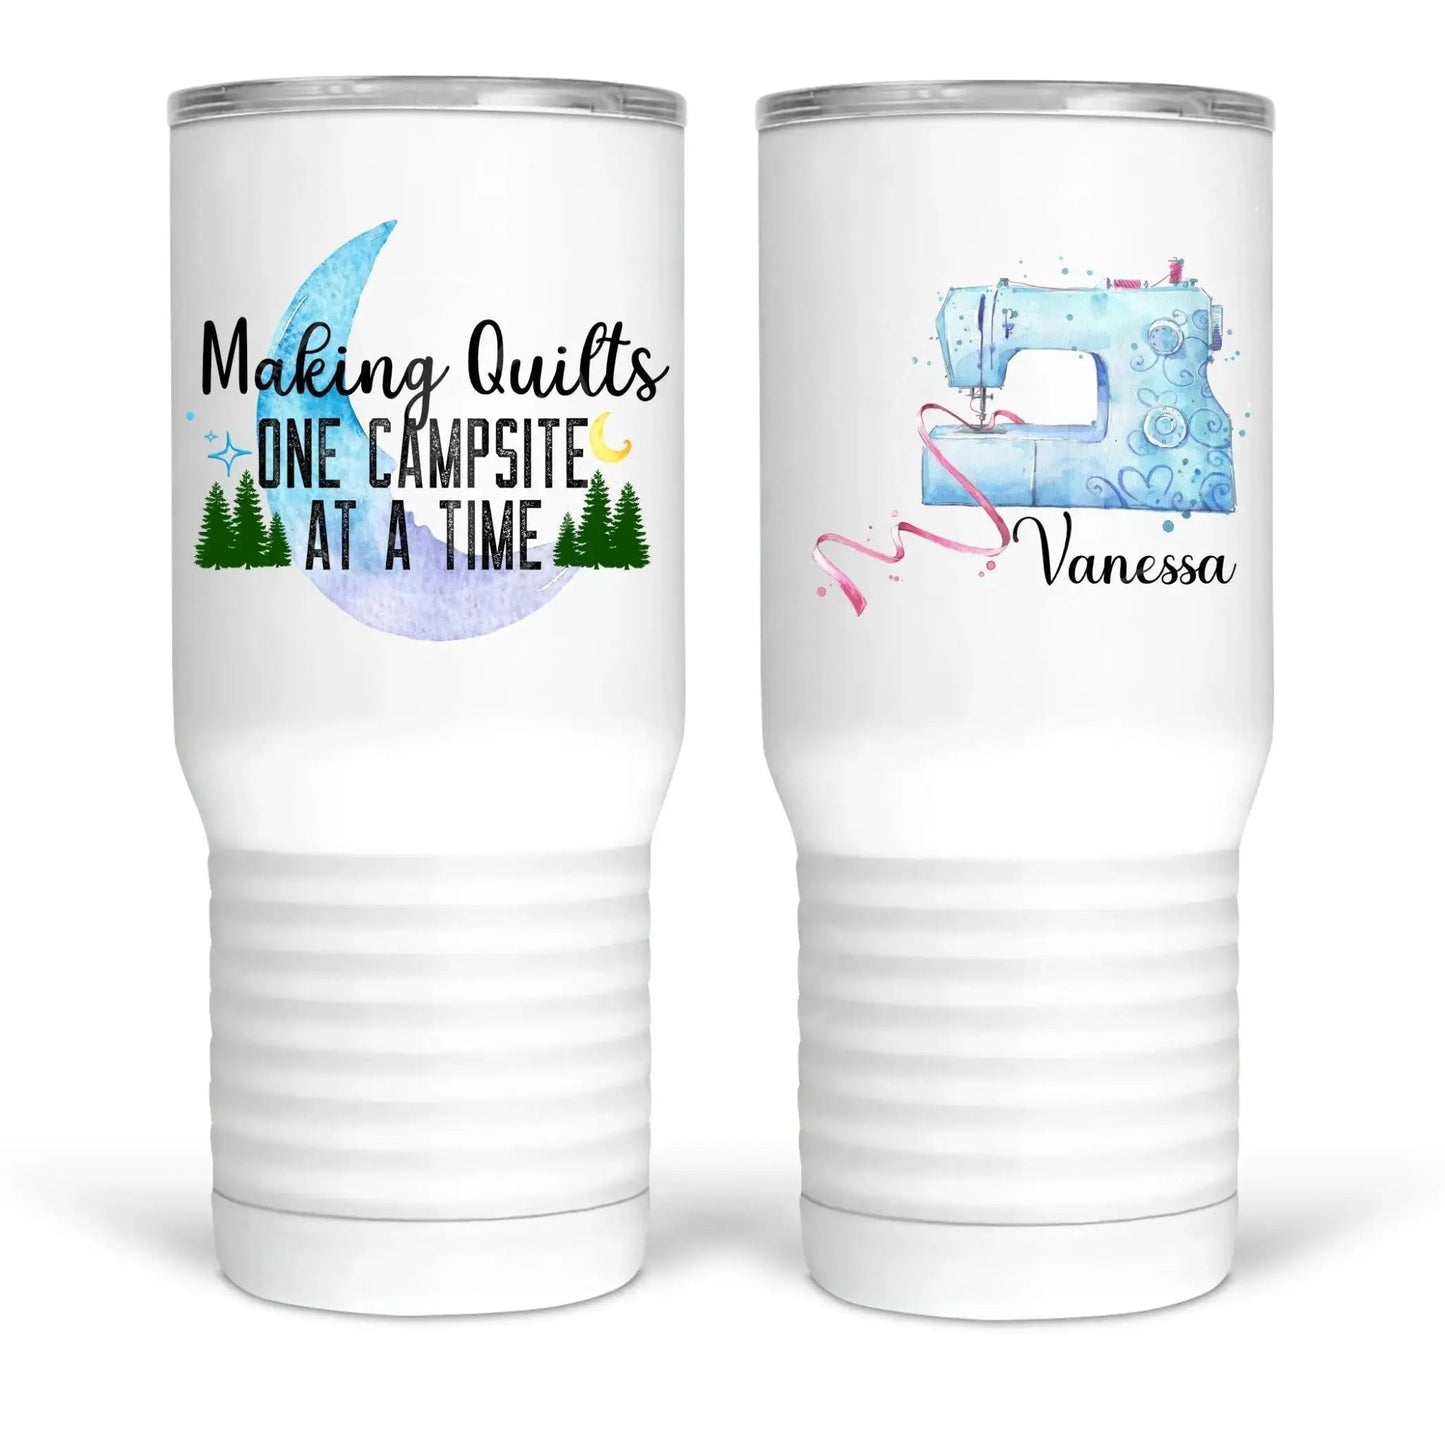 Making quilts one campsite at a time. Personalized RV Quilter mugs and tumblers - Jammin Threads